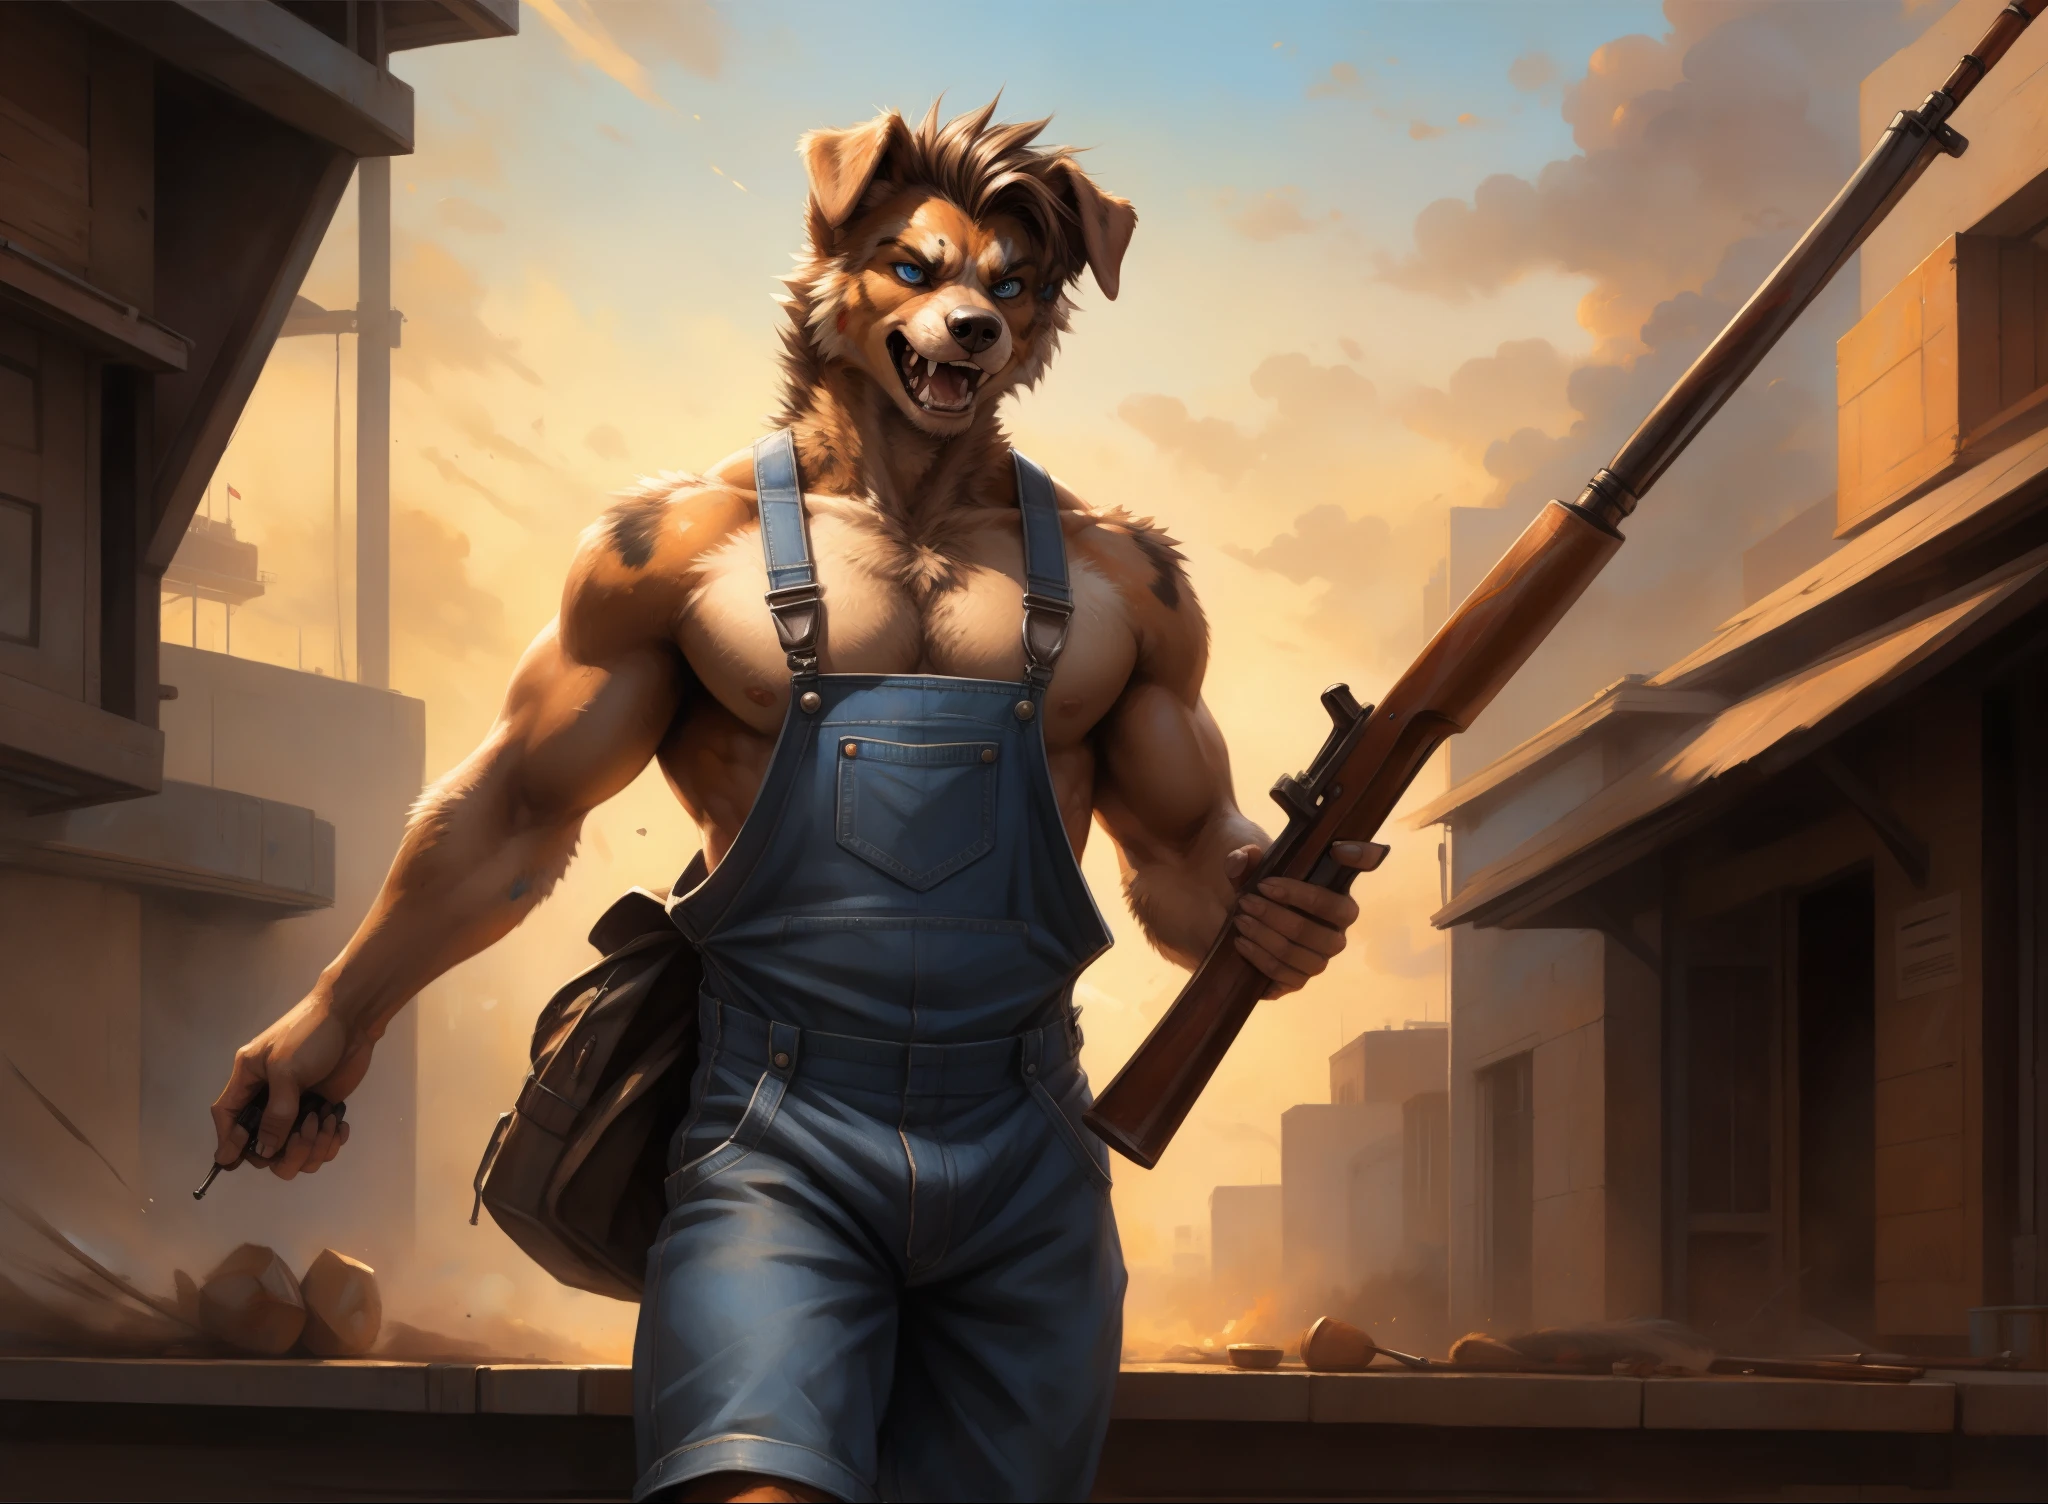 by kenket, by totesfleisch8, (by thebigslick, by silverfox5213:0.8), (by syuro:0.2), an Australian shepherd dog, male, masculine, muscular, short brown hair, mullet, shirtless, wearing blue overalls, angry, snarling, Blue eyes, barefoot, holding a shotgun, 